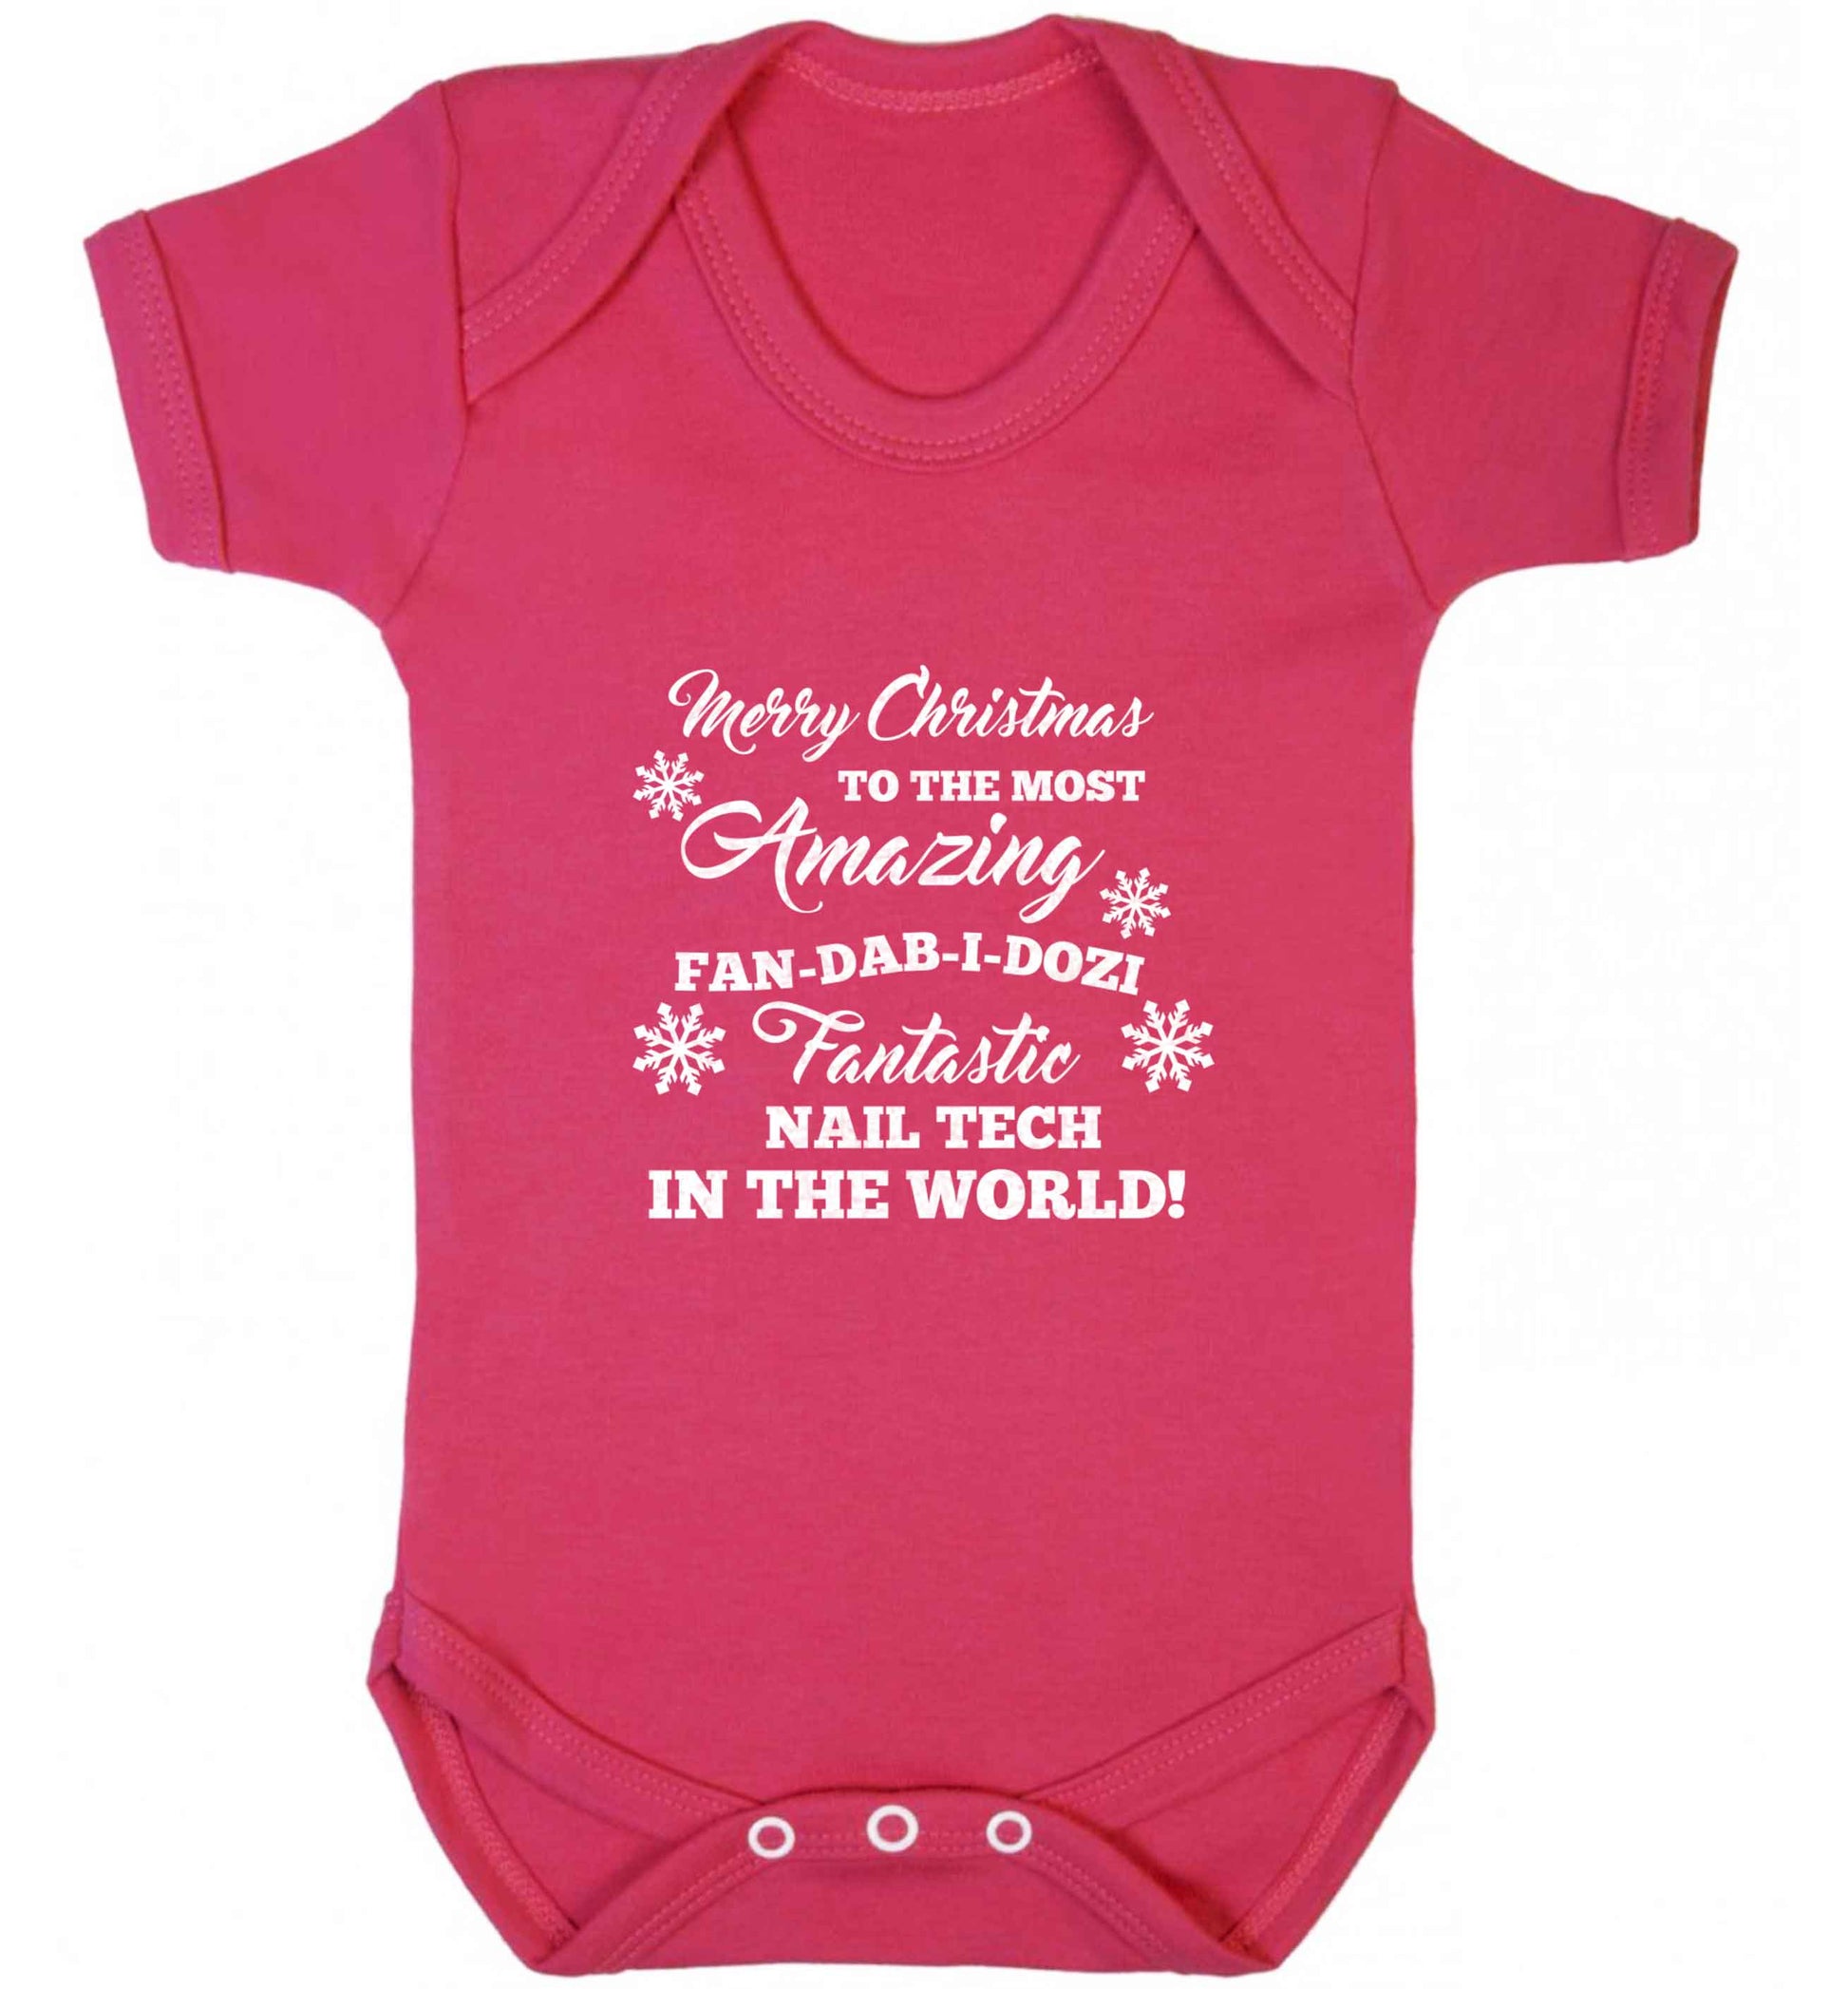 Merry Christmas to the most amazing fan-dab-i-dozi fantasic nail technician in the world baby vest dark pink 18-24 months